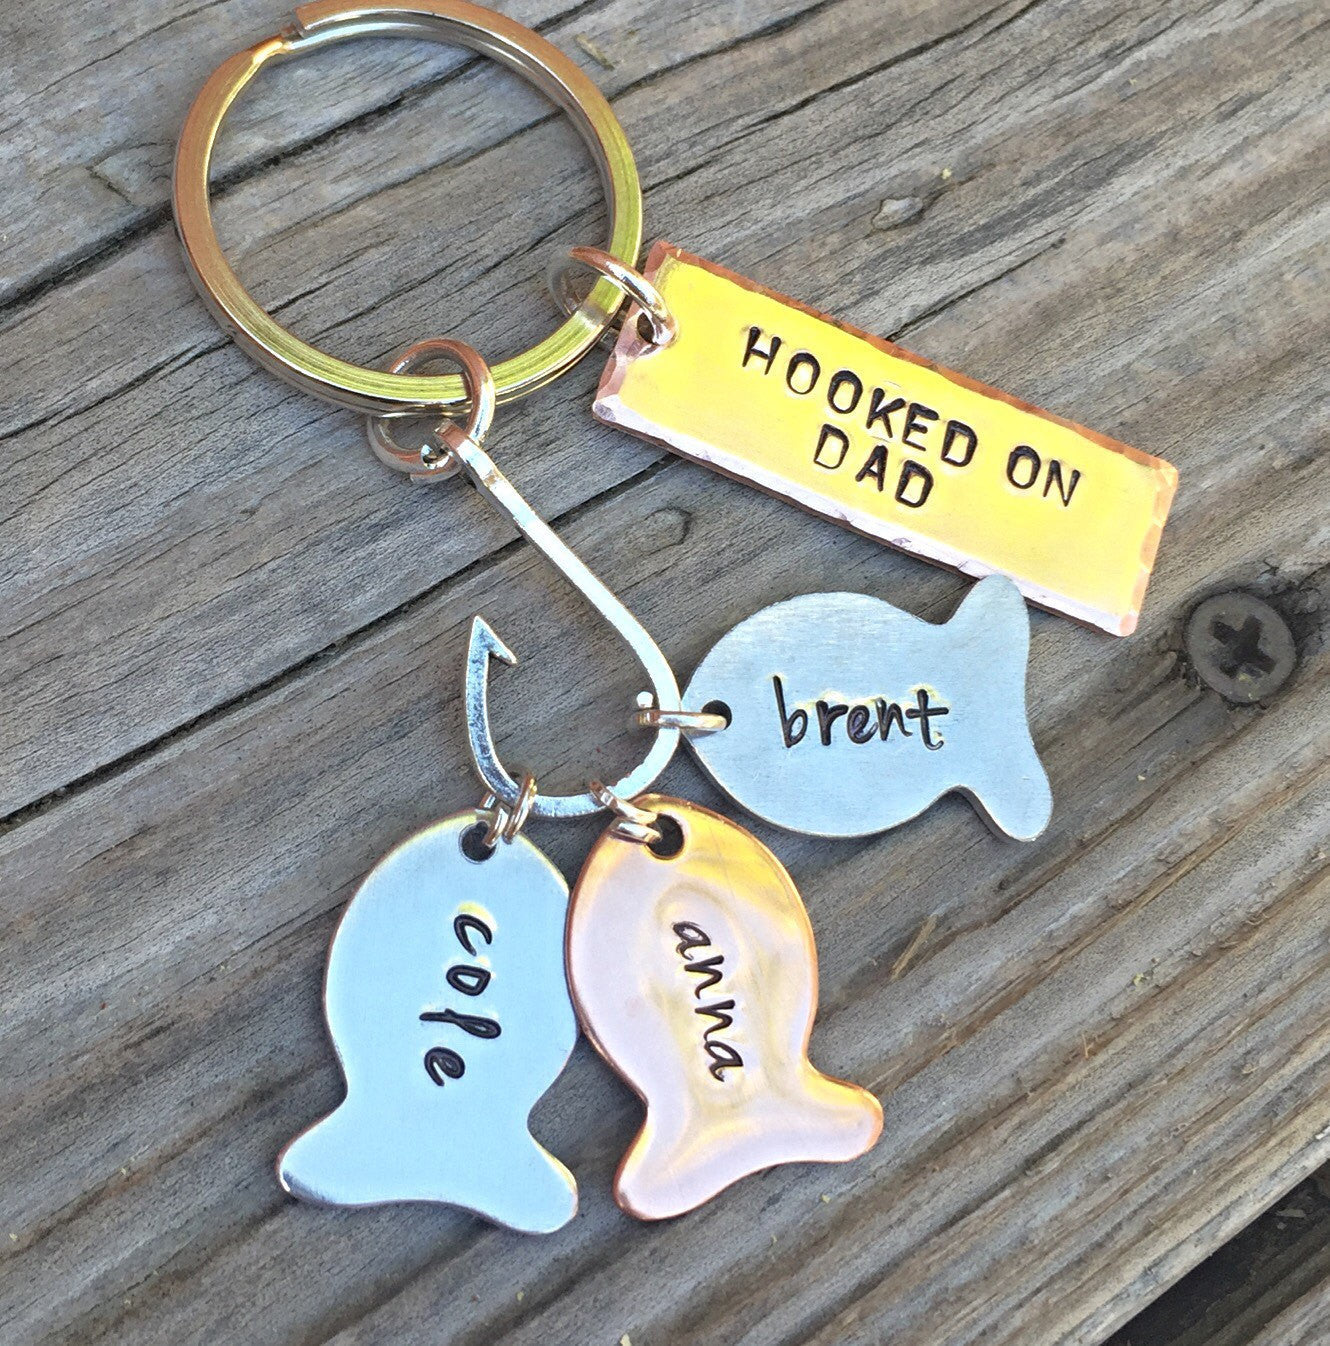 Fishing Keychain, Our Best Pape, Fishing Gifts, Personalized Fishing Keychain, Our Best Catch Dad,  natashaaloha - Natashaaloha, jewelry, bracelets, necklace, keychains, fishing lures, gifts for men, charms, personalized, 